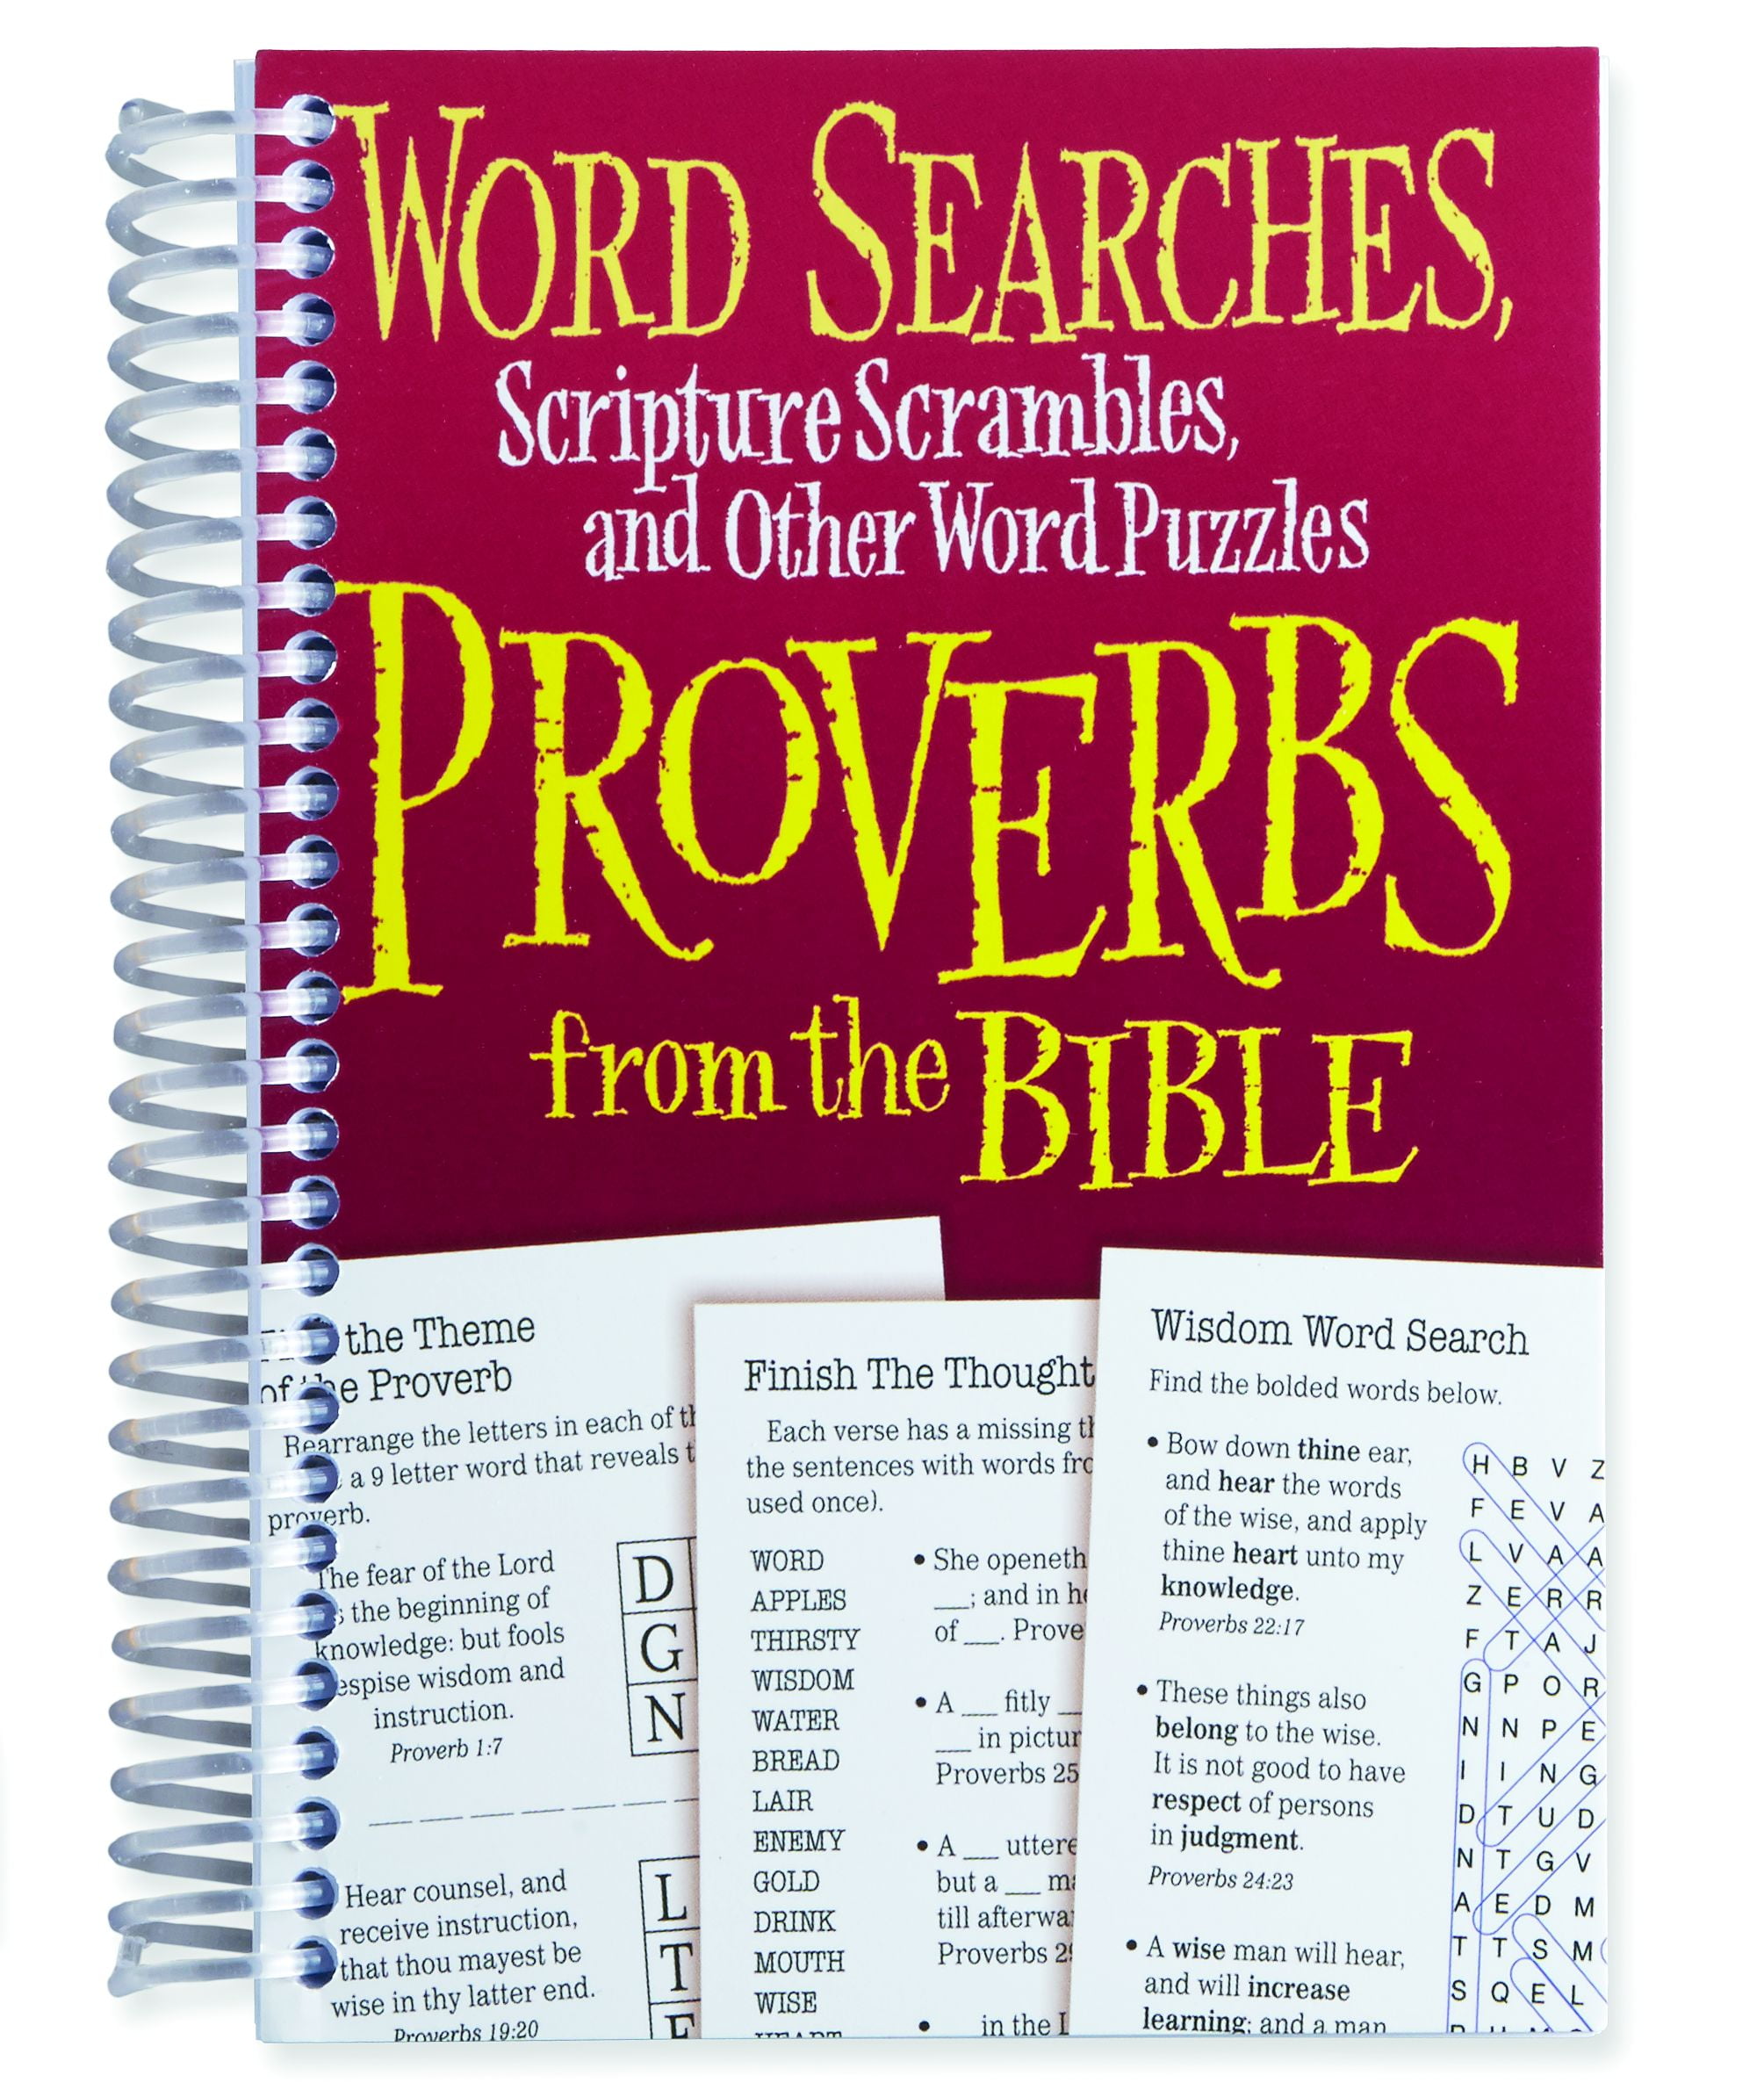 word-searches-scripture-scrambles-and-other-word-puzzles-from-proverbs-from-the-bible